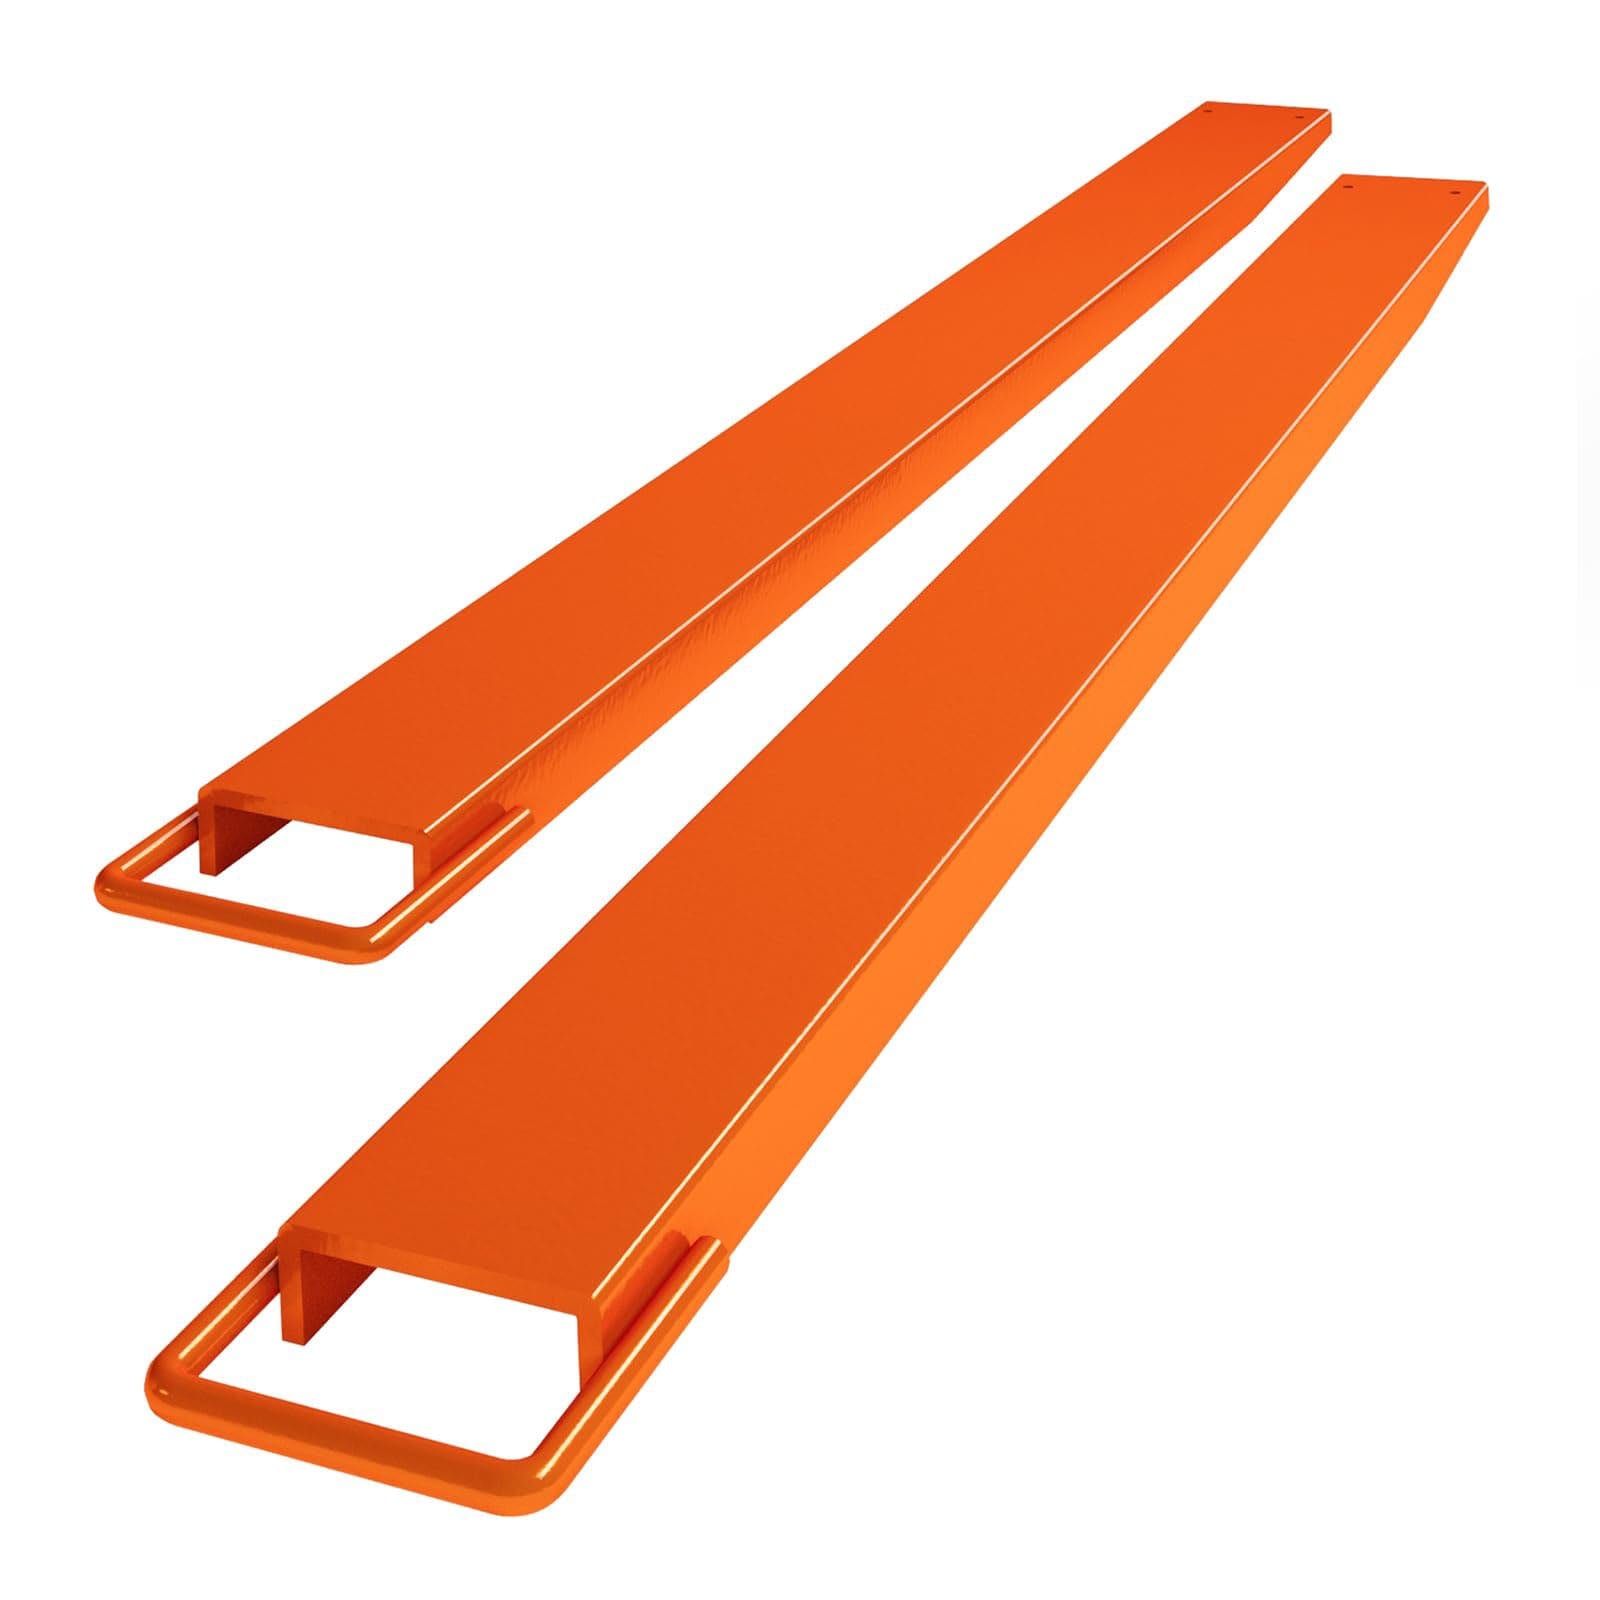 5.0 Inch Wide Heavy Duty Pallet Fork Extensions for Forklift